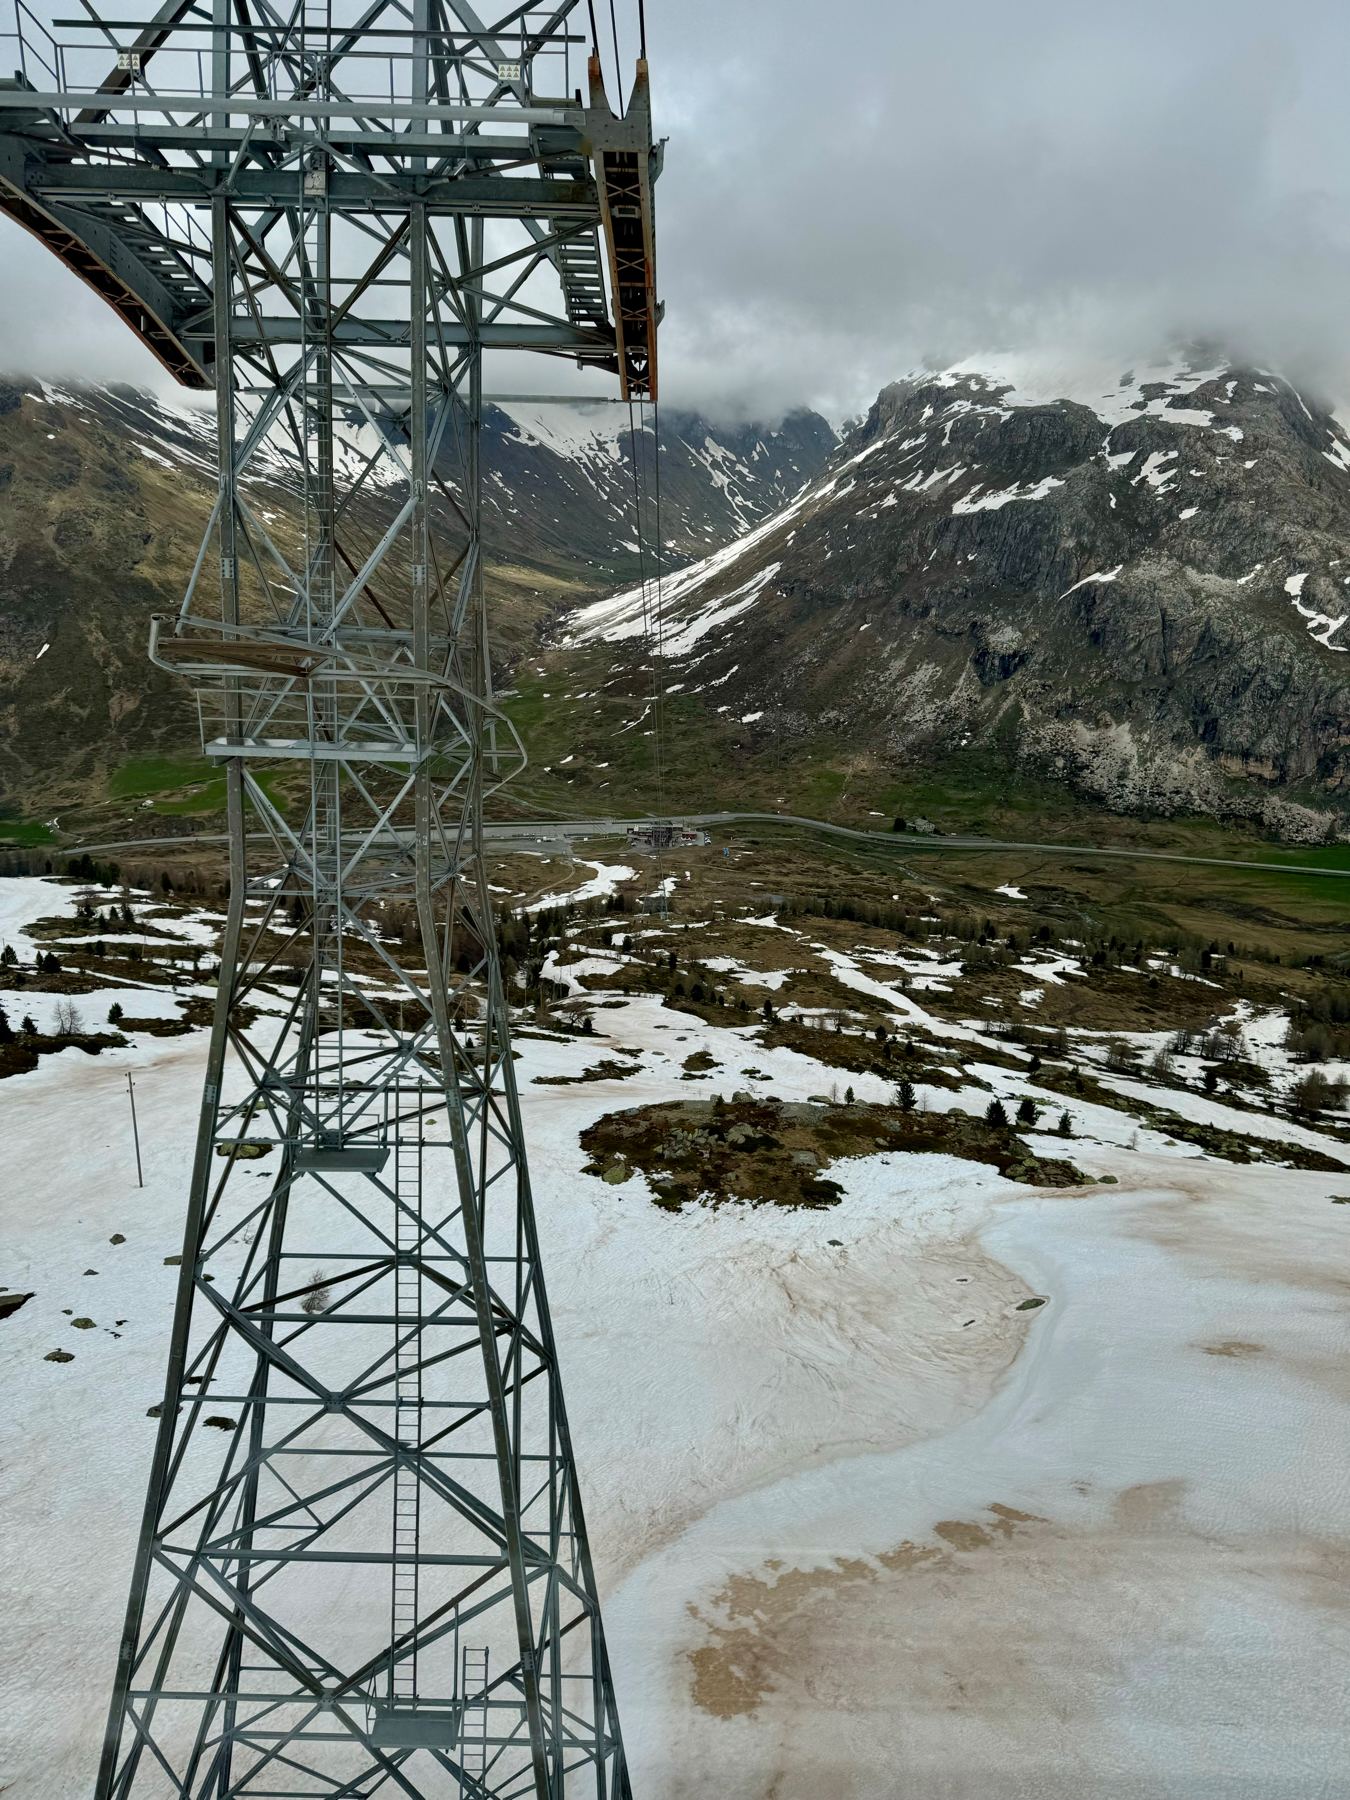 A towering metal cable car structure with a mountainous background partially covered in snow under a cloudy sky.